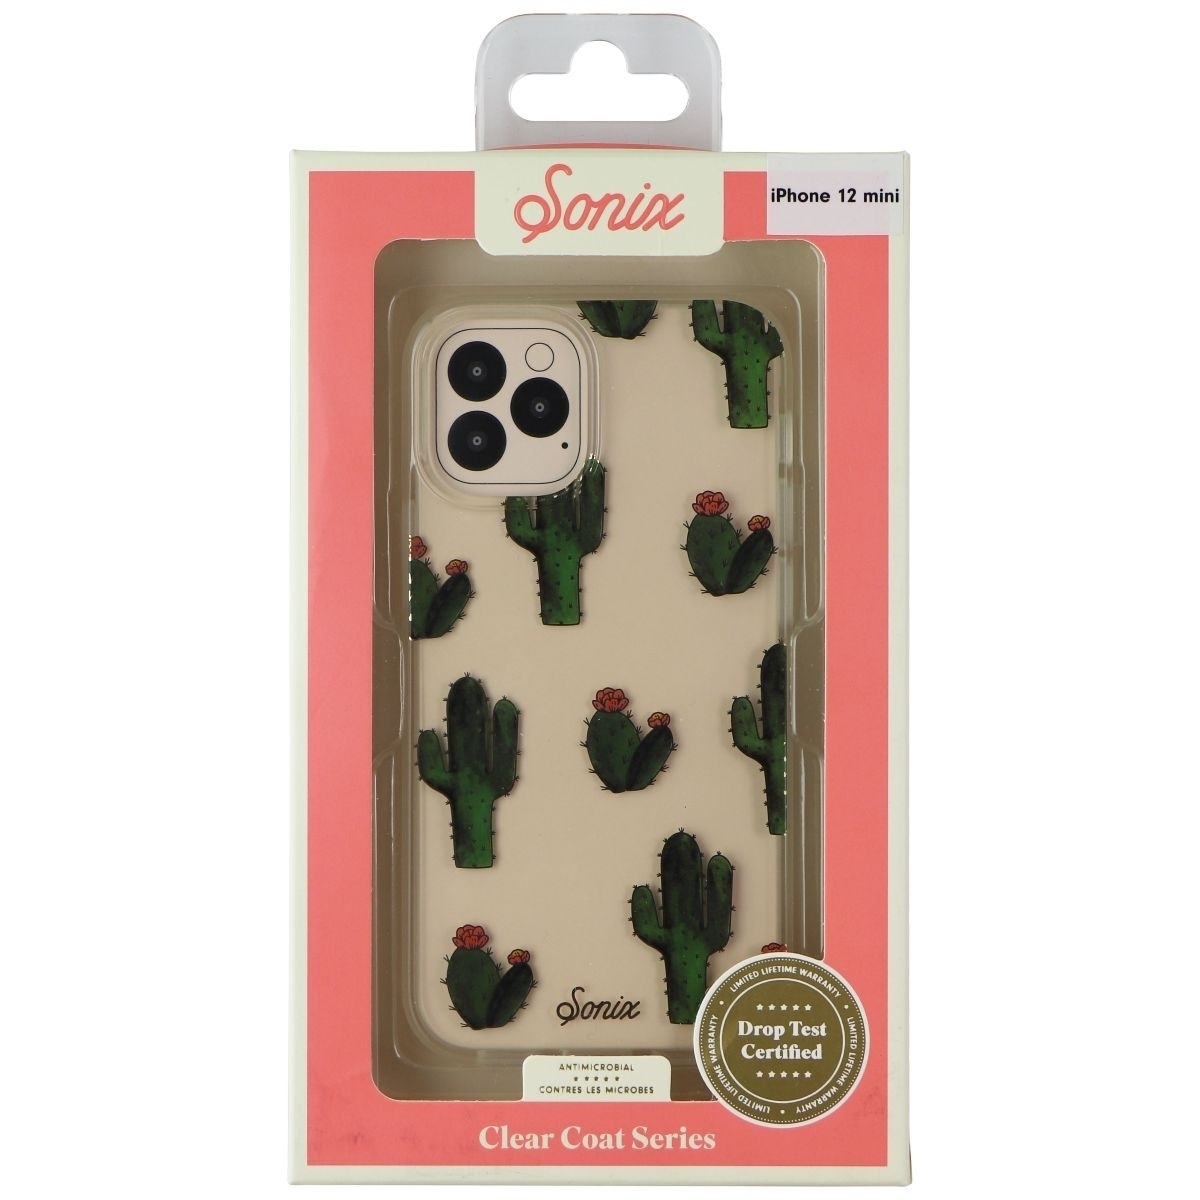 Sonix Clear Coat Series Case For Apple IPhone 12 Mini - Cactus Prickly Pear